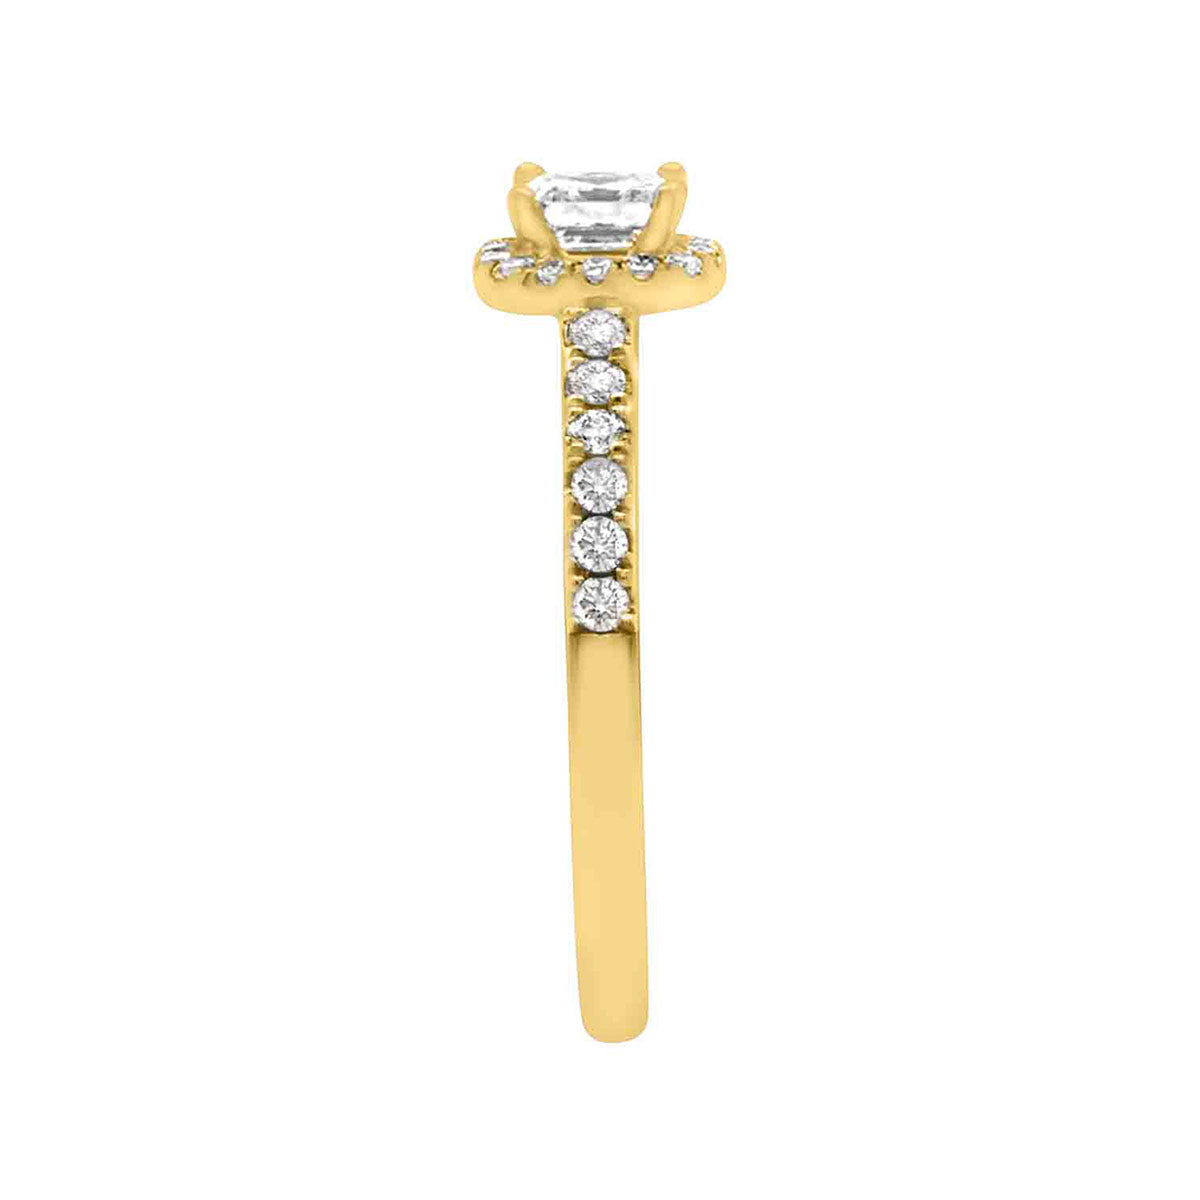 Asscher Halo Diamond Ring in yellow gold from a side view angle